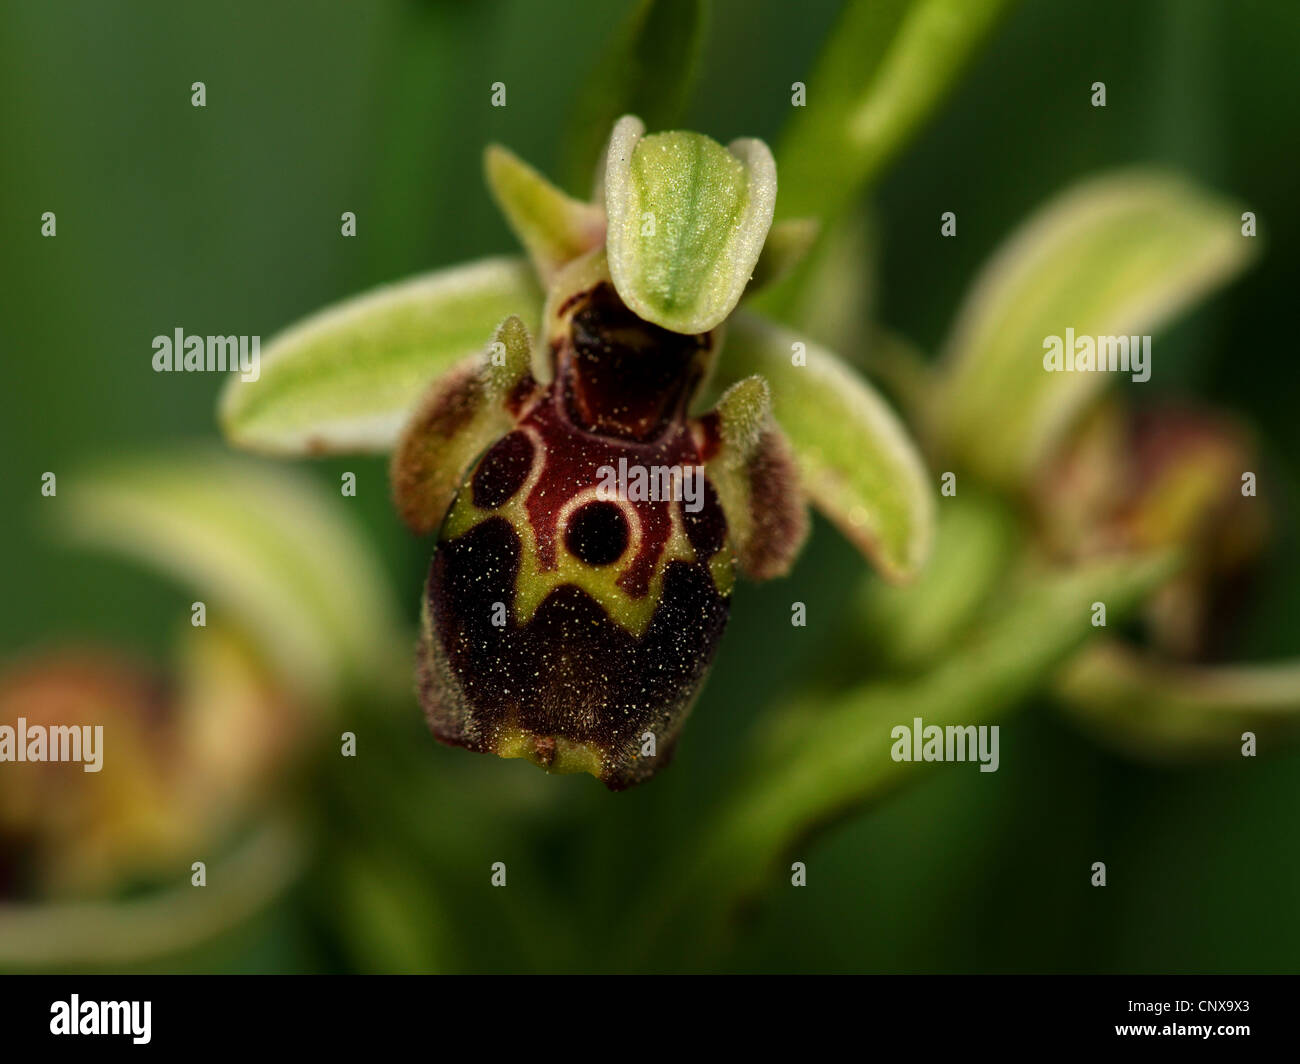 Ophrys umbilicata (Ophrys umbilicata), blooming, Greece, Lesbos Stock Photo